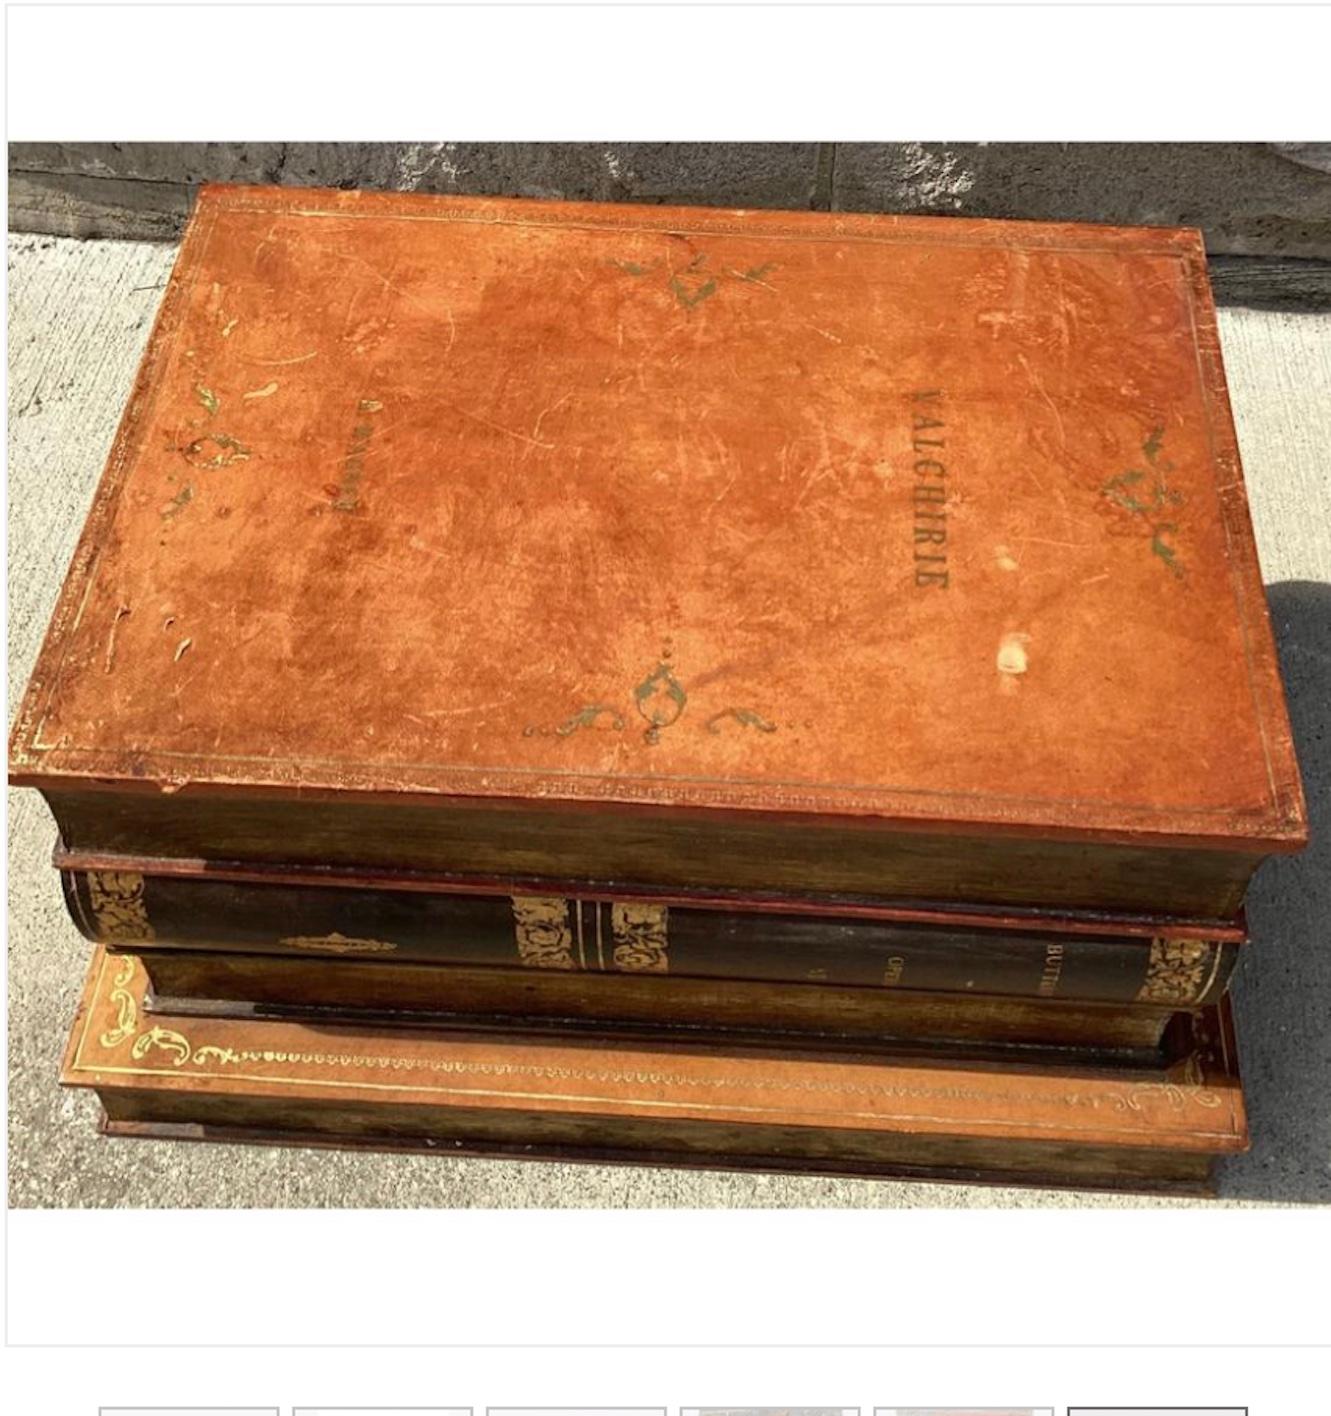 20th Century Handsome English Leather Bound Books As A Side Table With Interior Storage. For Sale